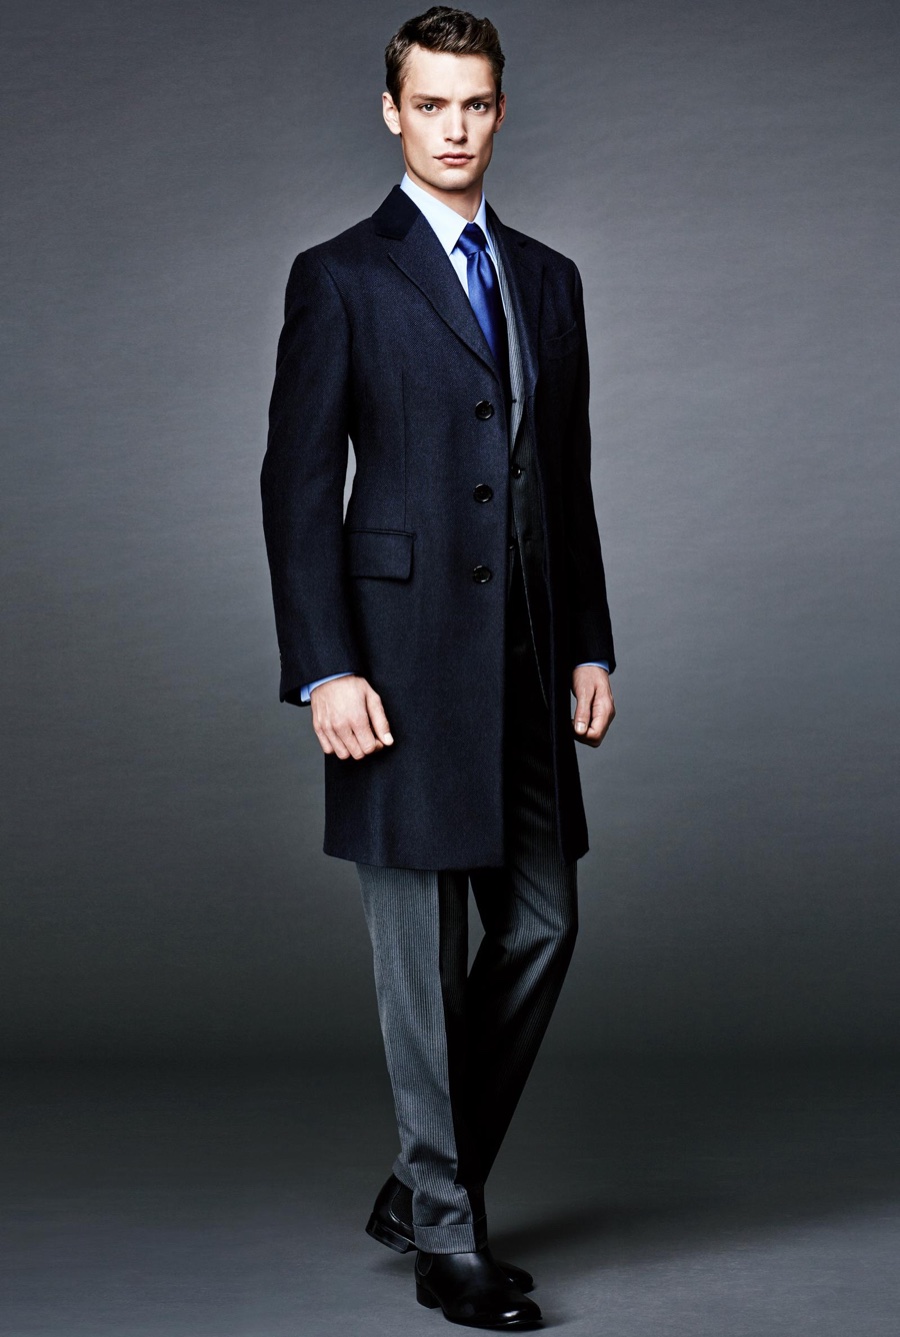 James Bond Suits: Tom Ford 2015 Capsule Collection